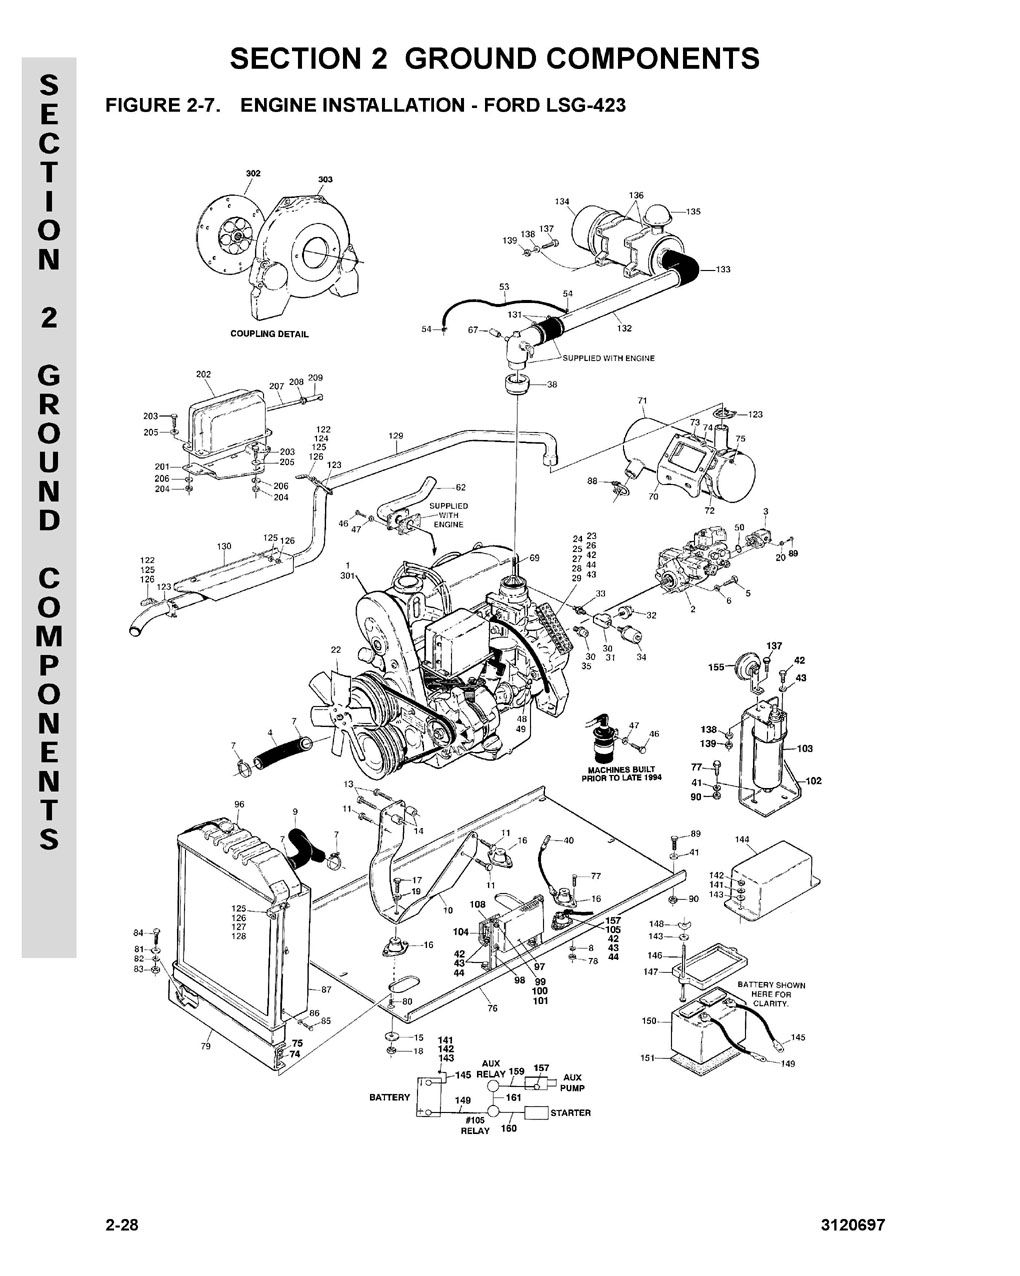 Construction Equipment Parts: JLG Parts from www.GCIron.com barnes hydraulic pump wiring diagram for 